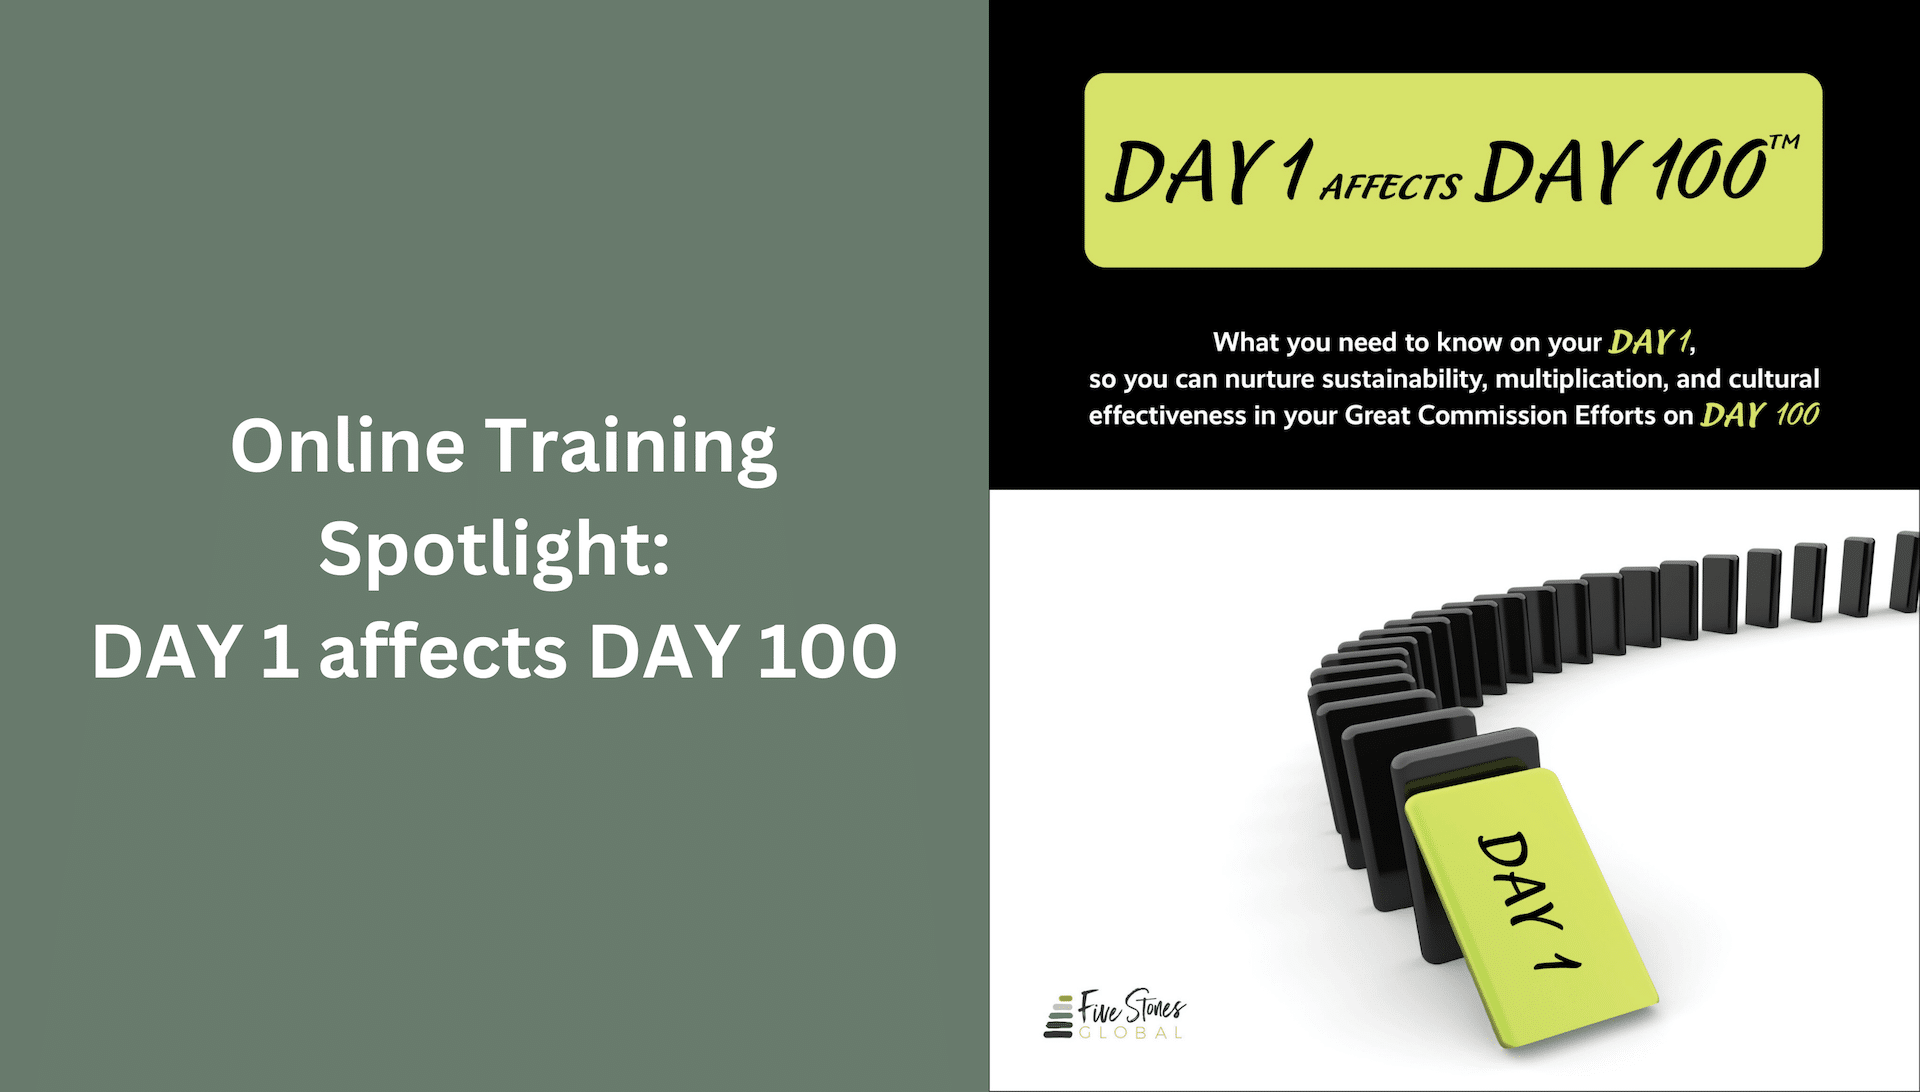 Online Training Spotlight: Day 1 affects Day 100